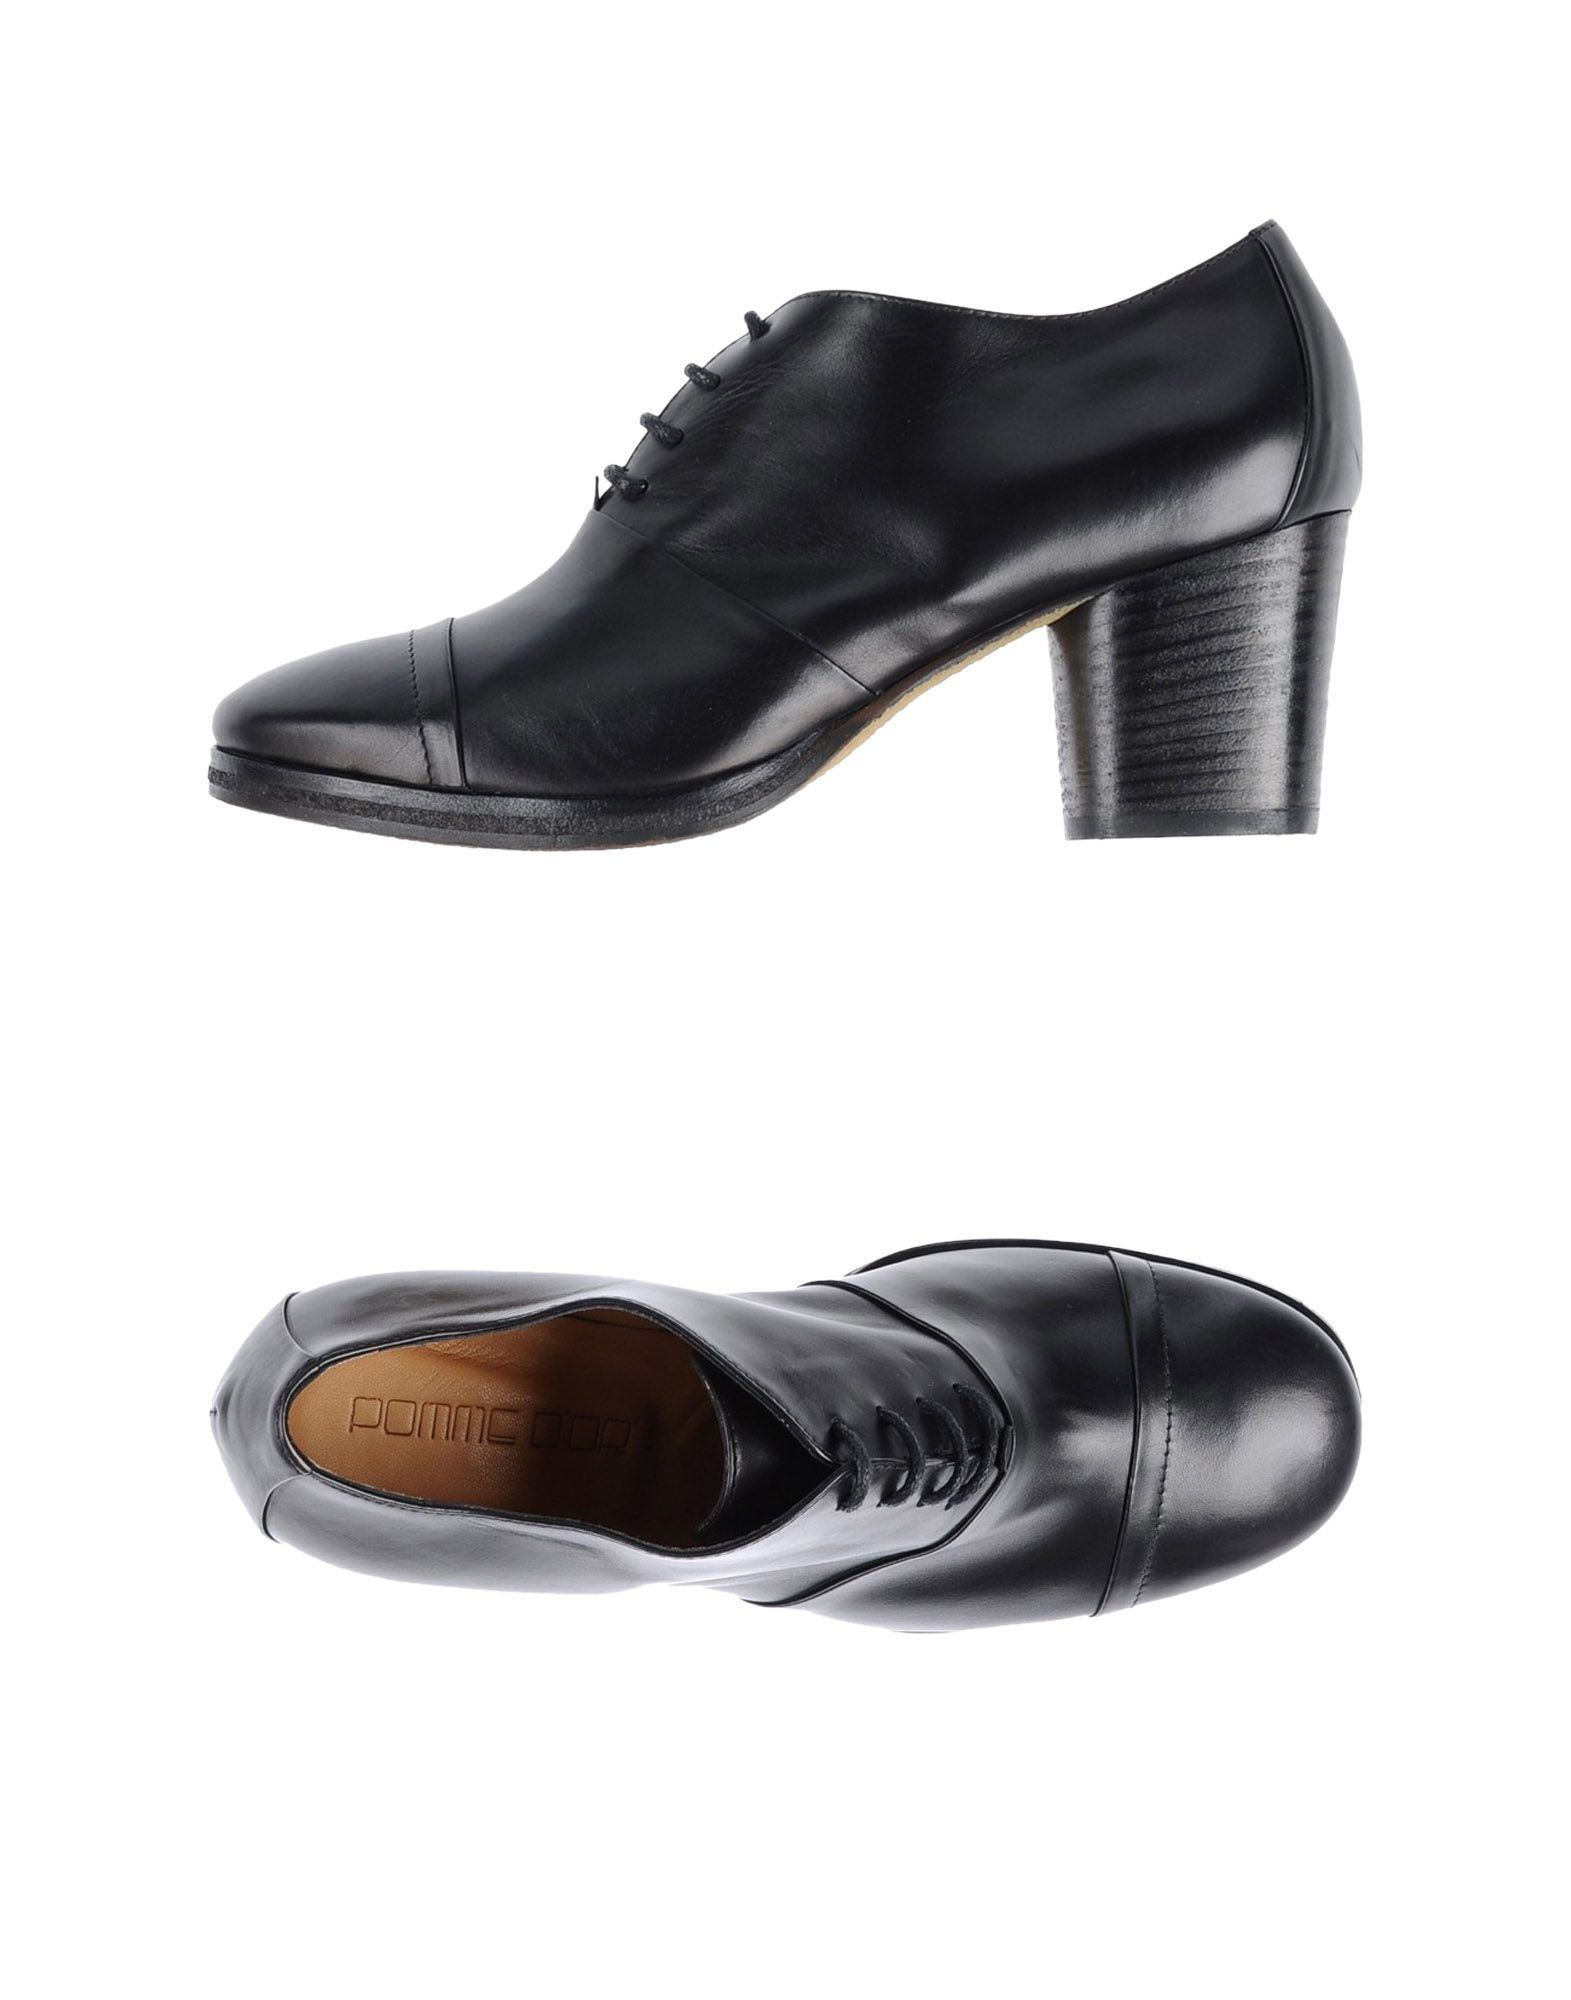 Pomme D'or Lace-Up Shoes in Black - Lyst